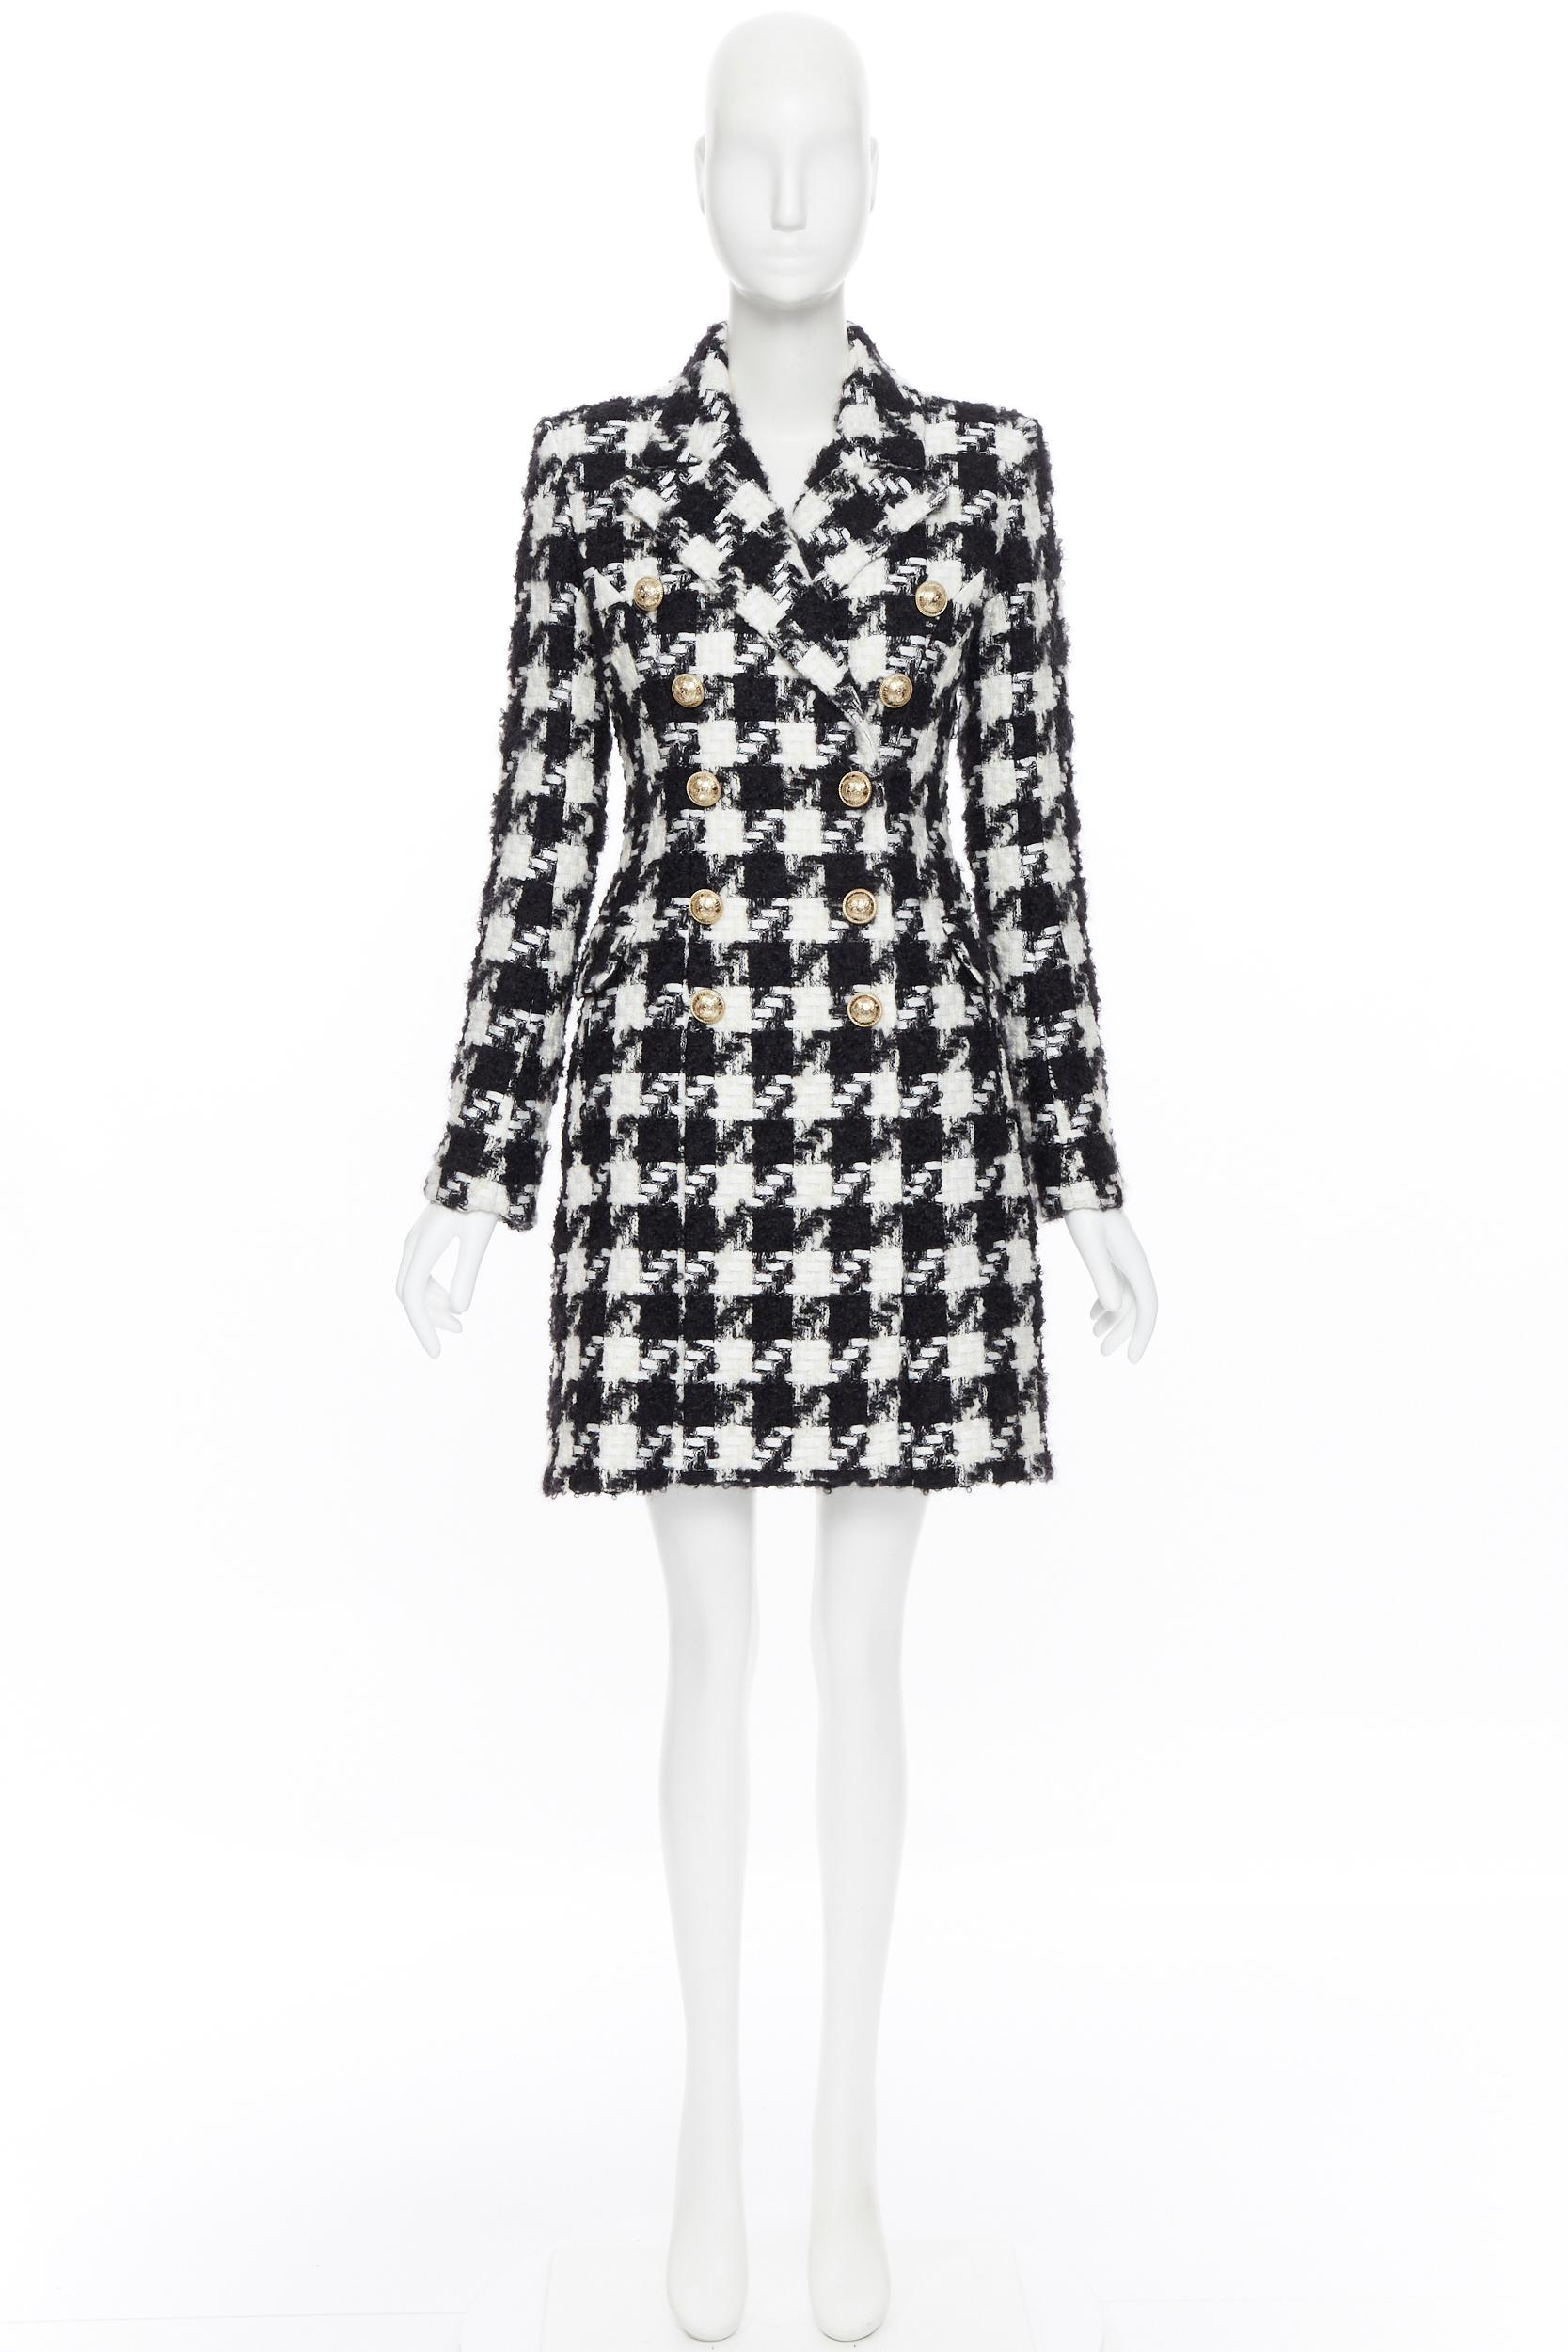 new BALMAIN houndstooth black white tweed double breasted military coat FR34 XS
Brand: Balmain
Designer: Olivier Rousteing
Model Name / Style: Double breasted coat
Material: Wool mohair blend
Color: Black, white
Pattern: Houndstooth
Closure: